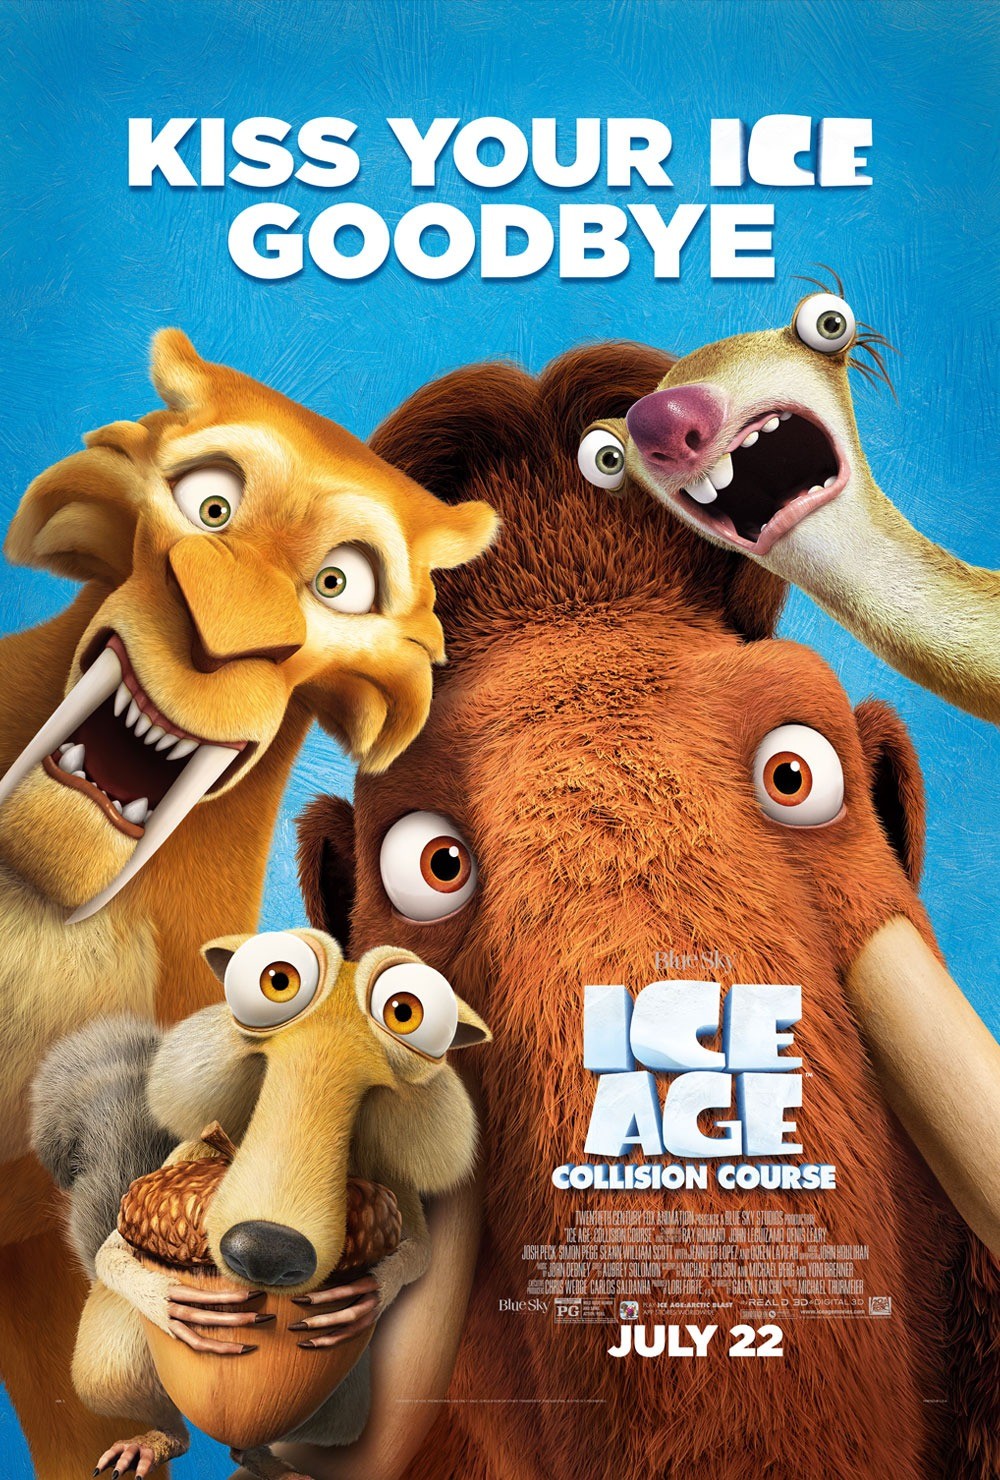 ice-age-collision-course-now-on-blu-ray-and-dvd-giveaway-let-s-riset